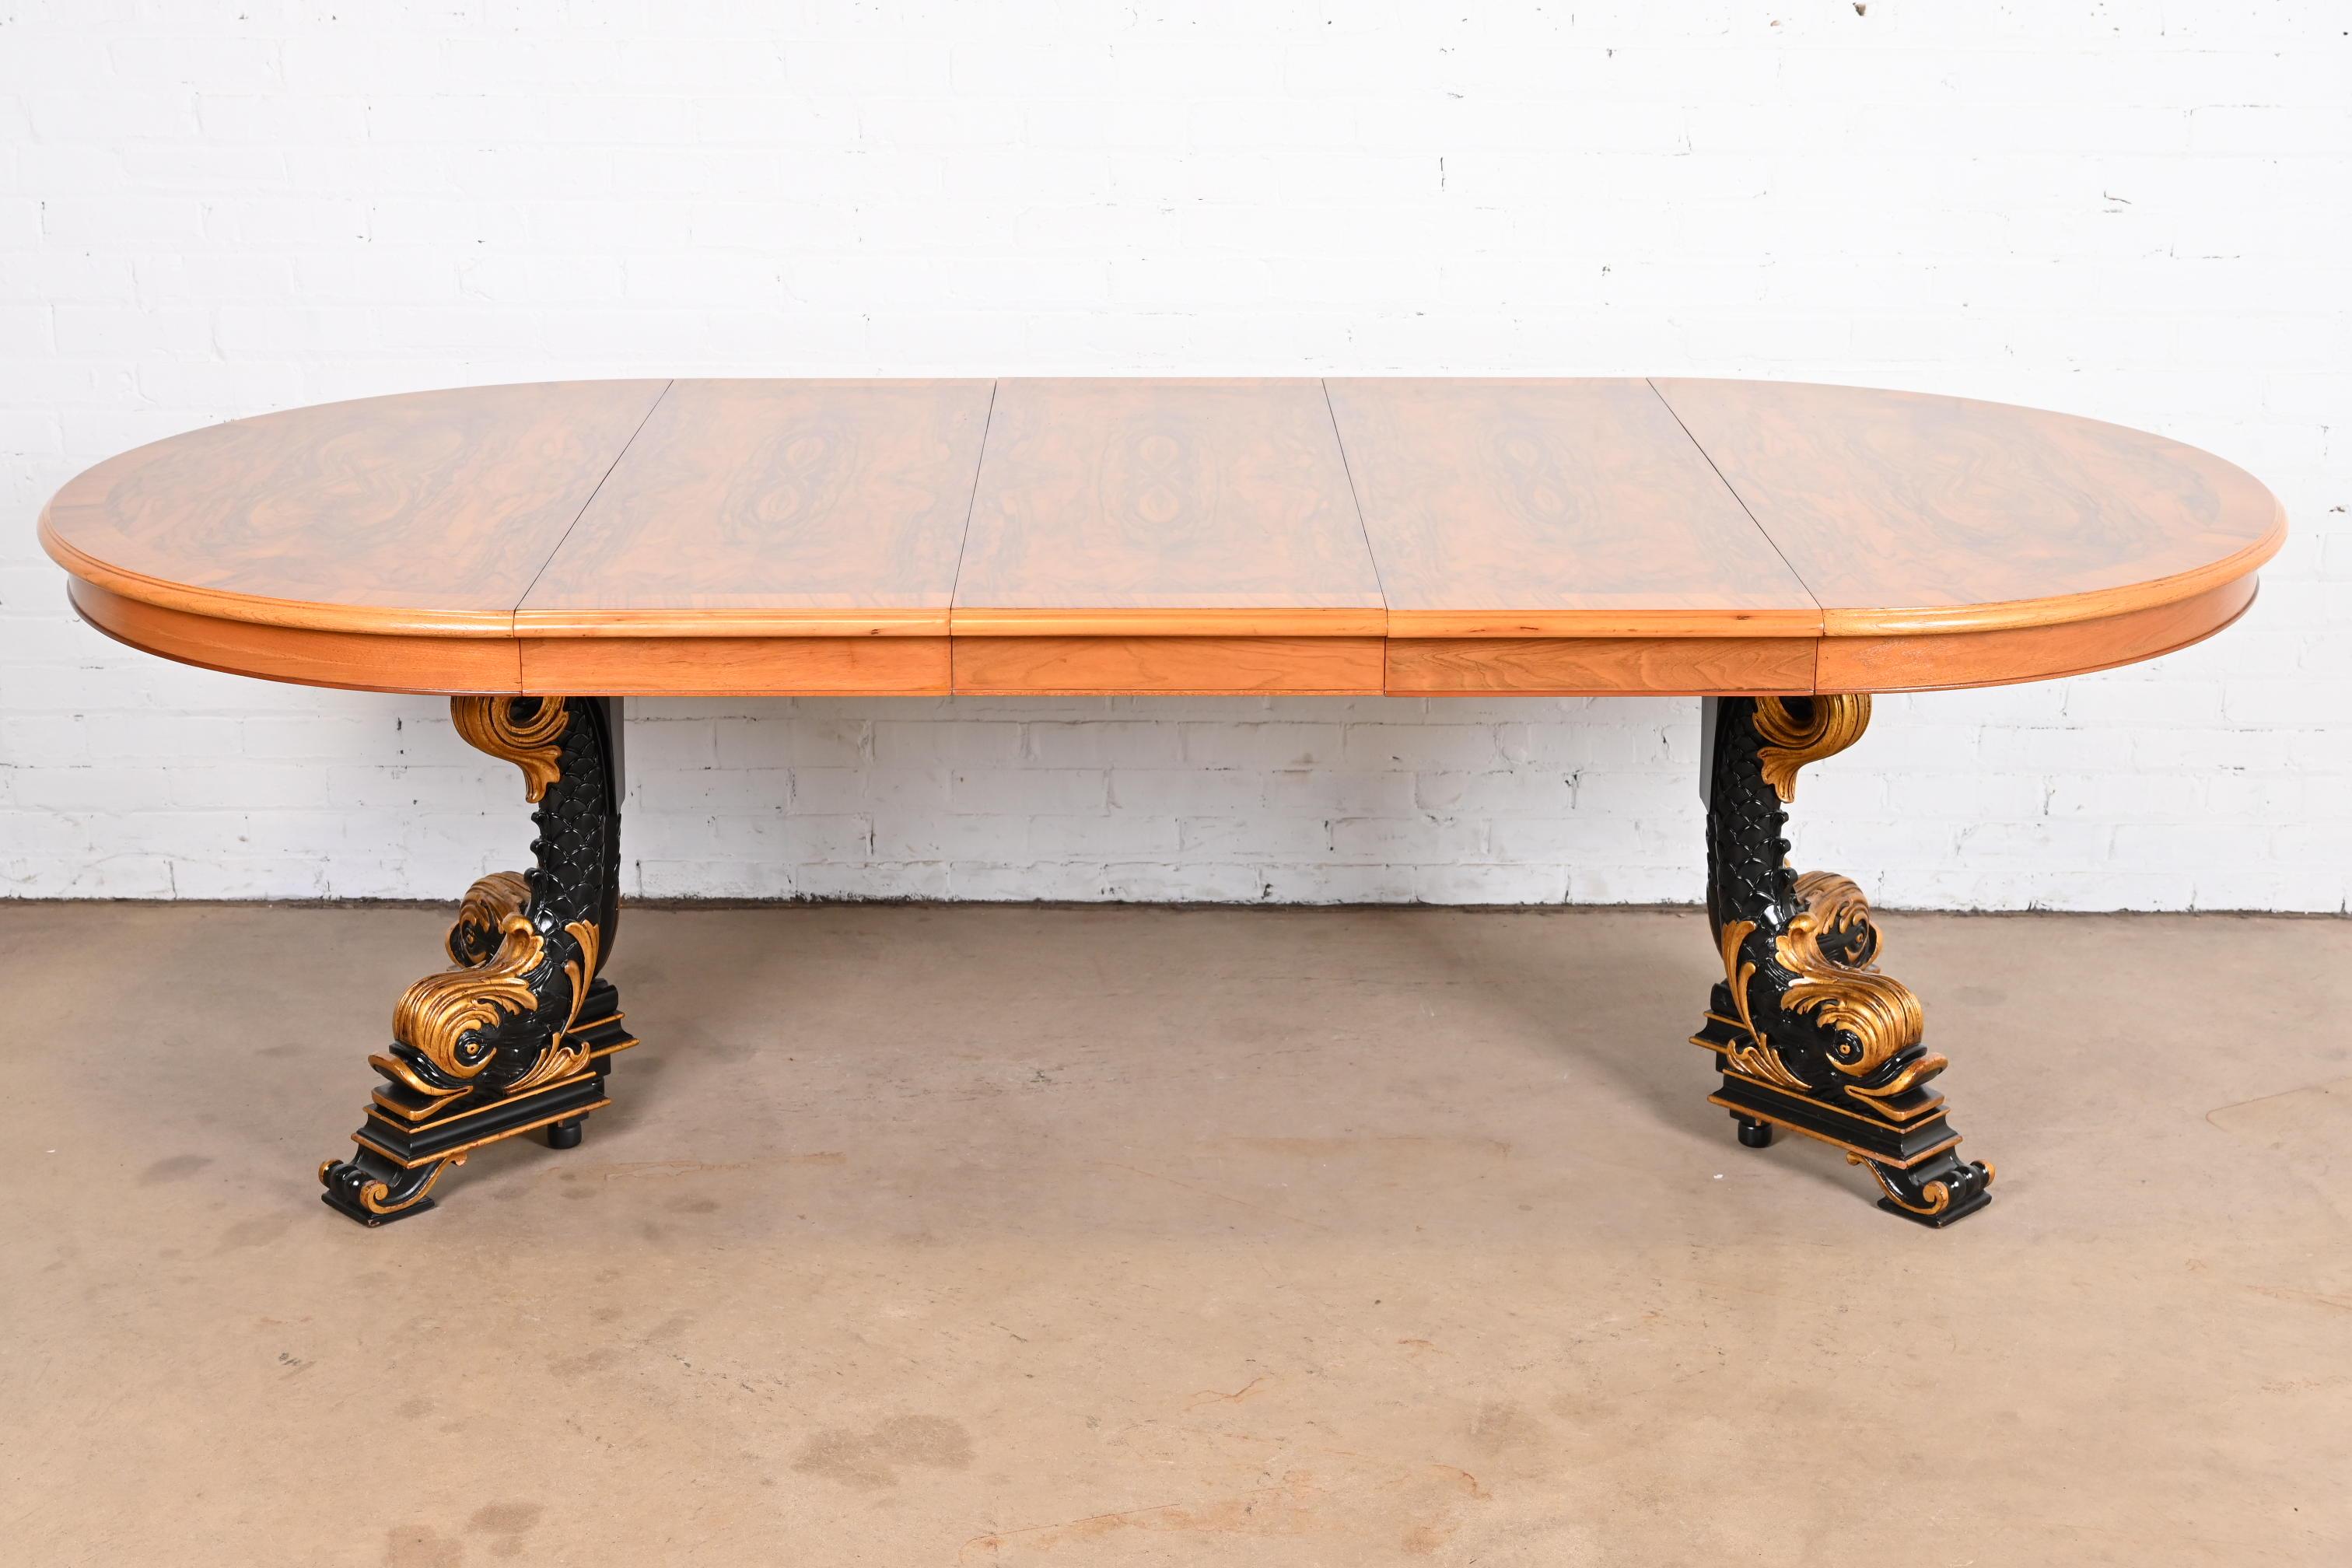 An exceptional Regency or neoclassical style extension pedestal dining table

By Karges Furniture

USA, circa 1980s

Gorgeous book-matched banded burled walnut top, with carved solid hardwood ebonized and gold gilt split pedestal in the iconic